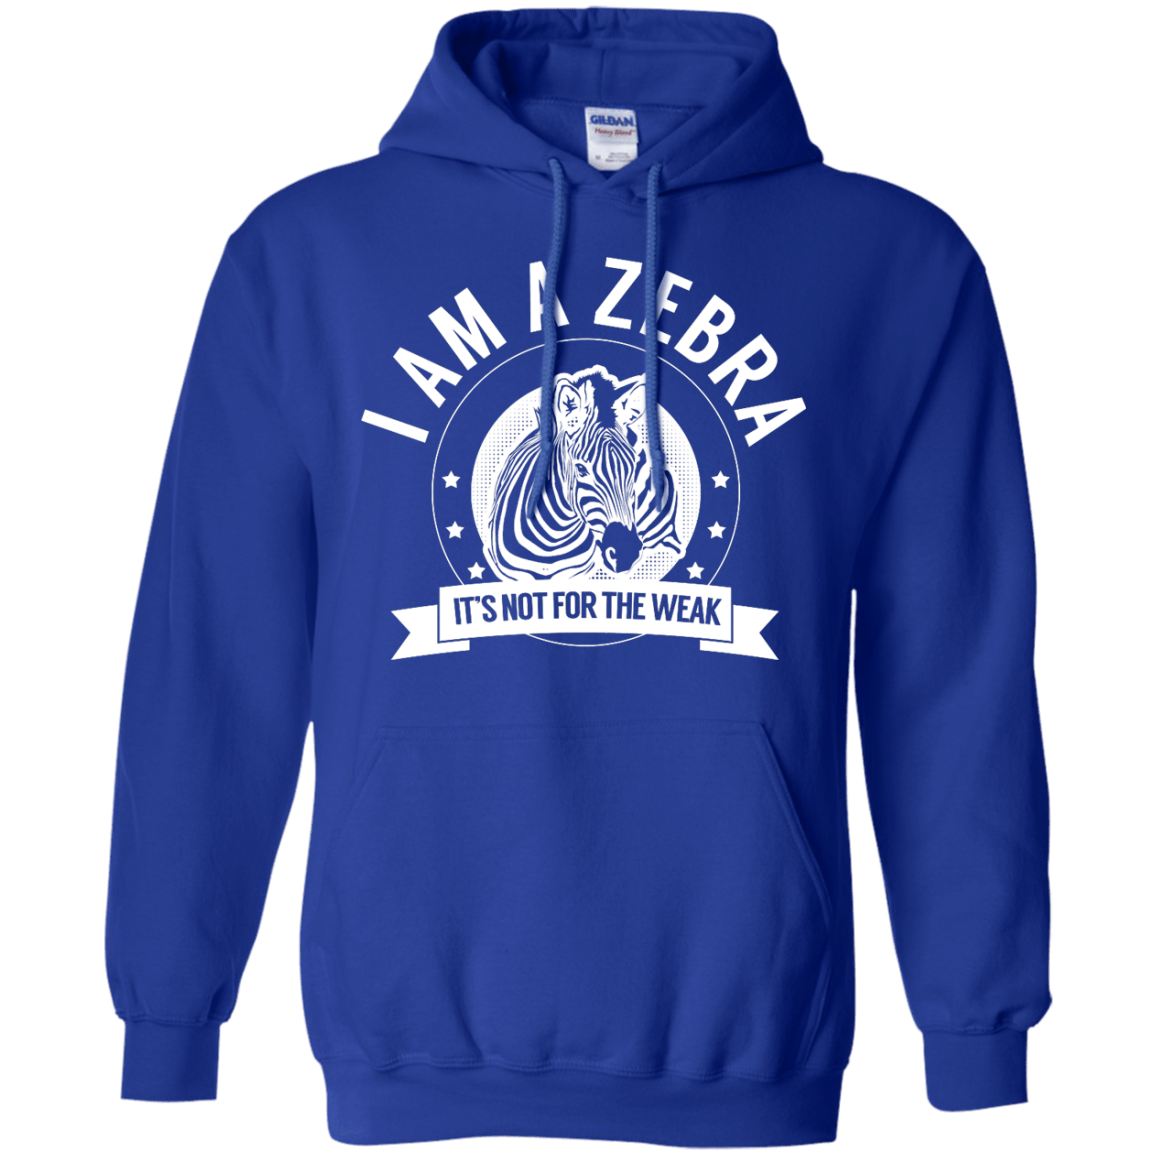 Zebra Warrior Not for the Weak Pullover Hoodie 8 oz - The Unchargeables